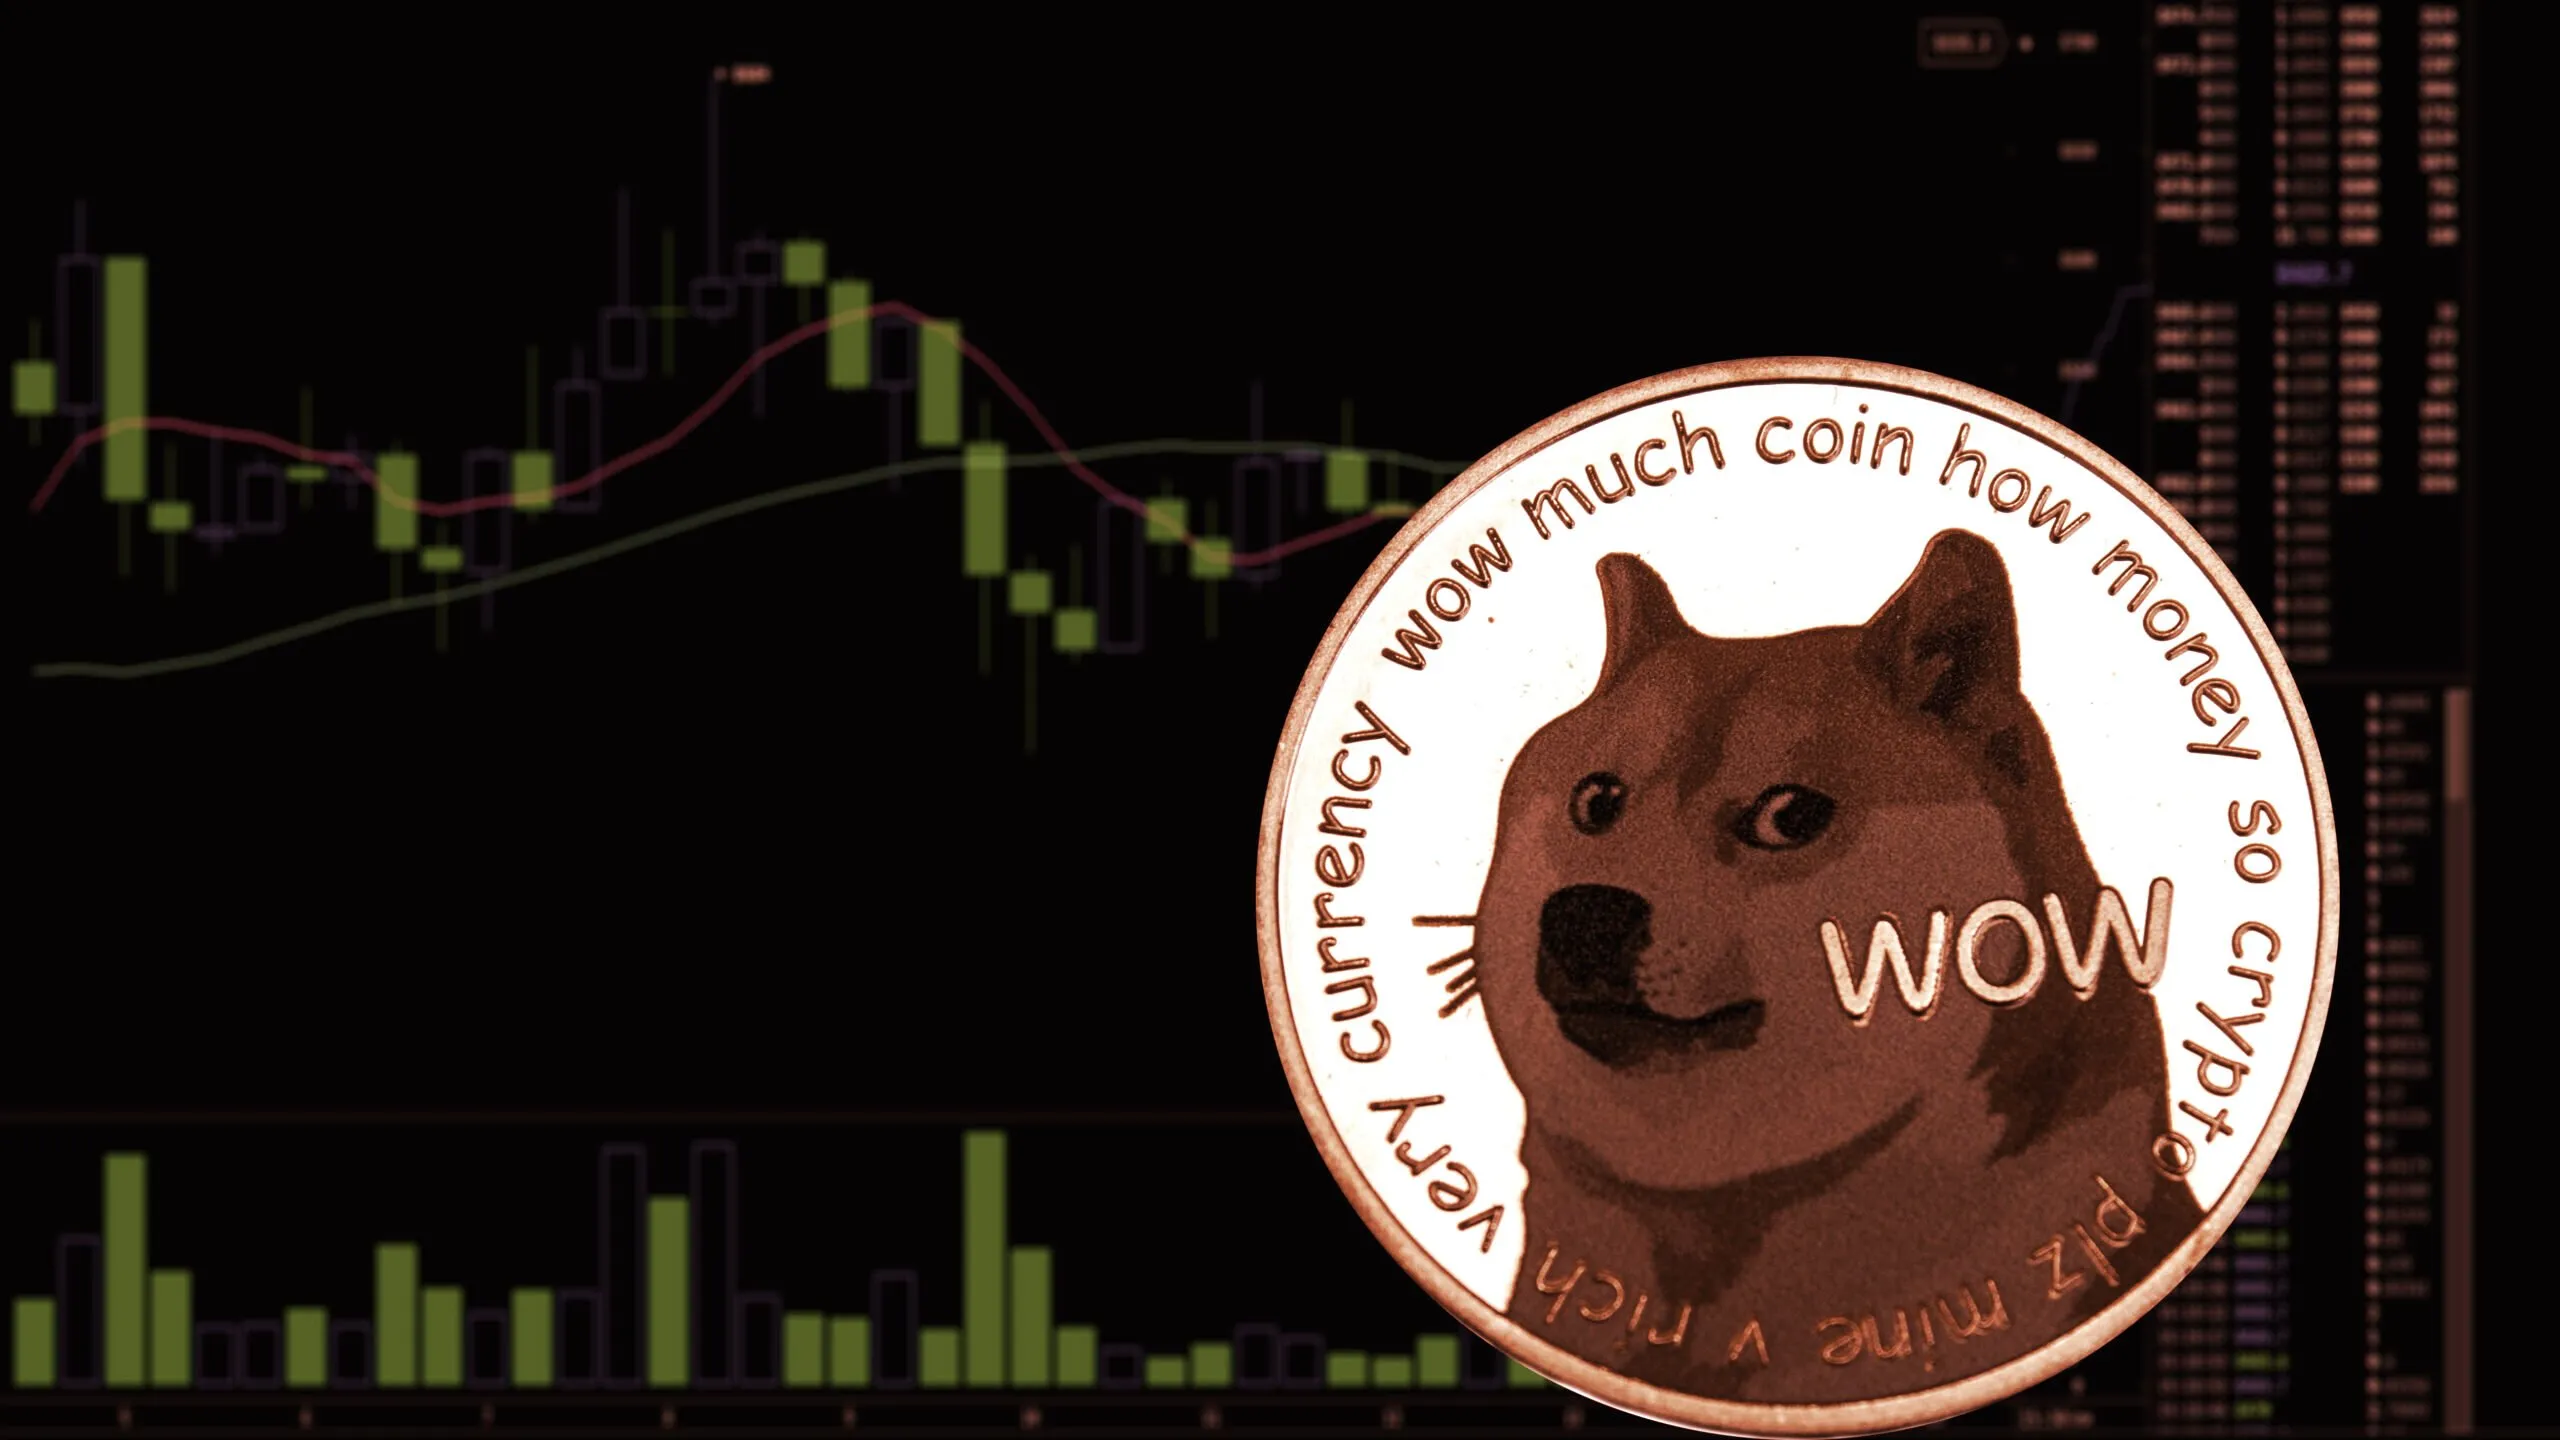 Best Doge Mining Games and Rewards in 2021 